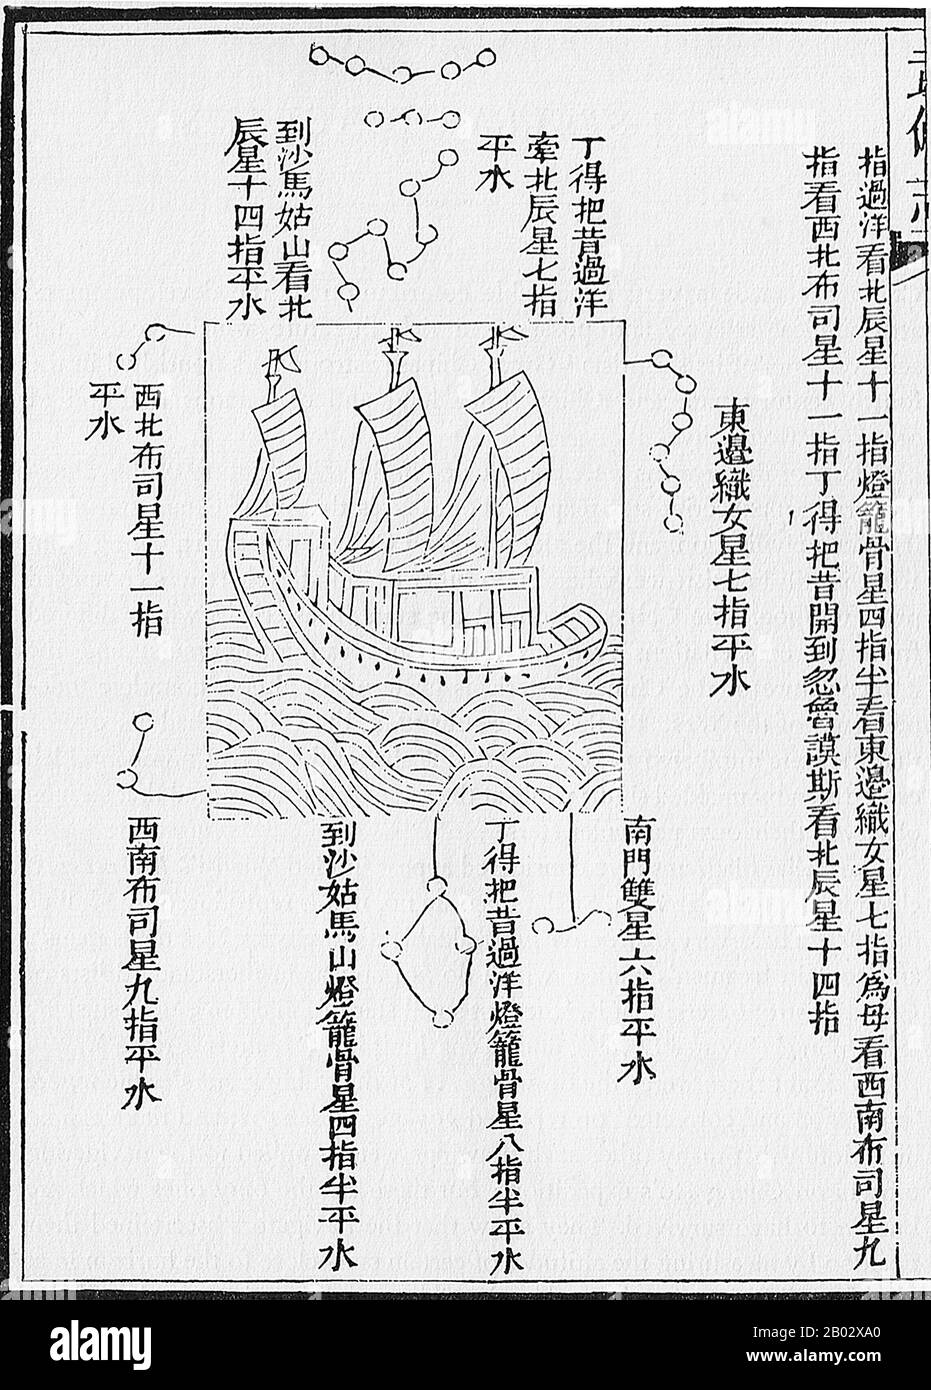 Between 1405 and 1433, the Ming government sponsored a series of seven naval expeditions. The Yongle emperor designed them to establish a Chinese presence, impose imperial control over trade, impress foreign peoples in the Indian Ocean basin and extend the empire's tributary system.  Zheng He was placed as the admiral in control of the huge fleet and armed forces that undertook these expeditions. Zheng He's first voyage consisted of a fleet of up to 317 ships holding almost 28,000 crewmen, with each ship housing up to 500 men.  Zheng He's fleets visited Arabia, Brunei, East Africa, India, the Stock Photo